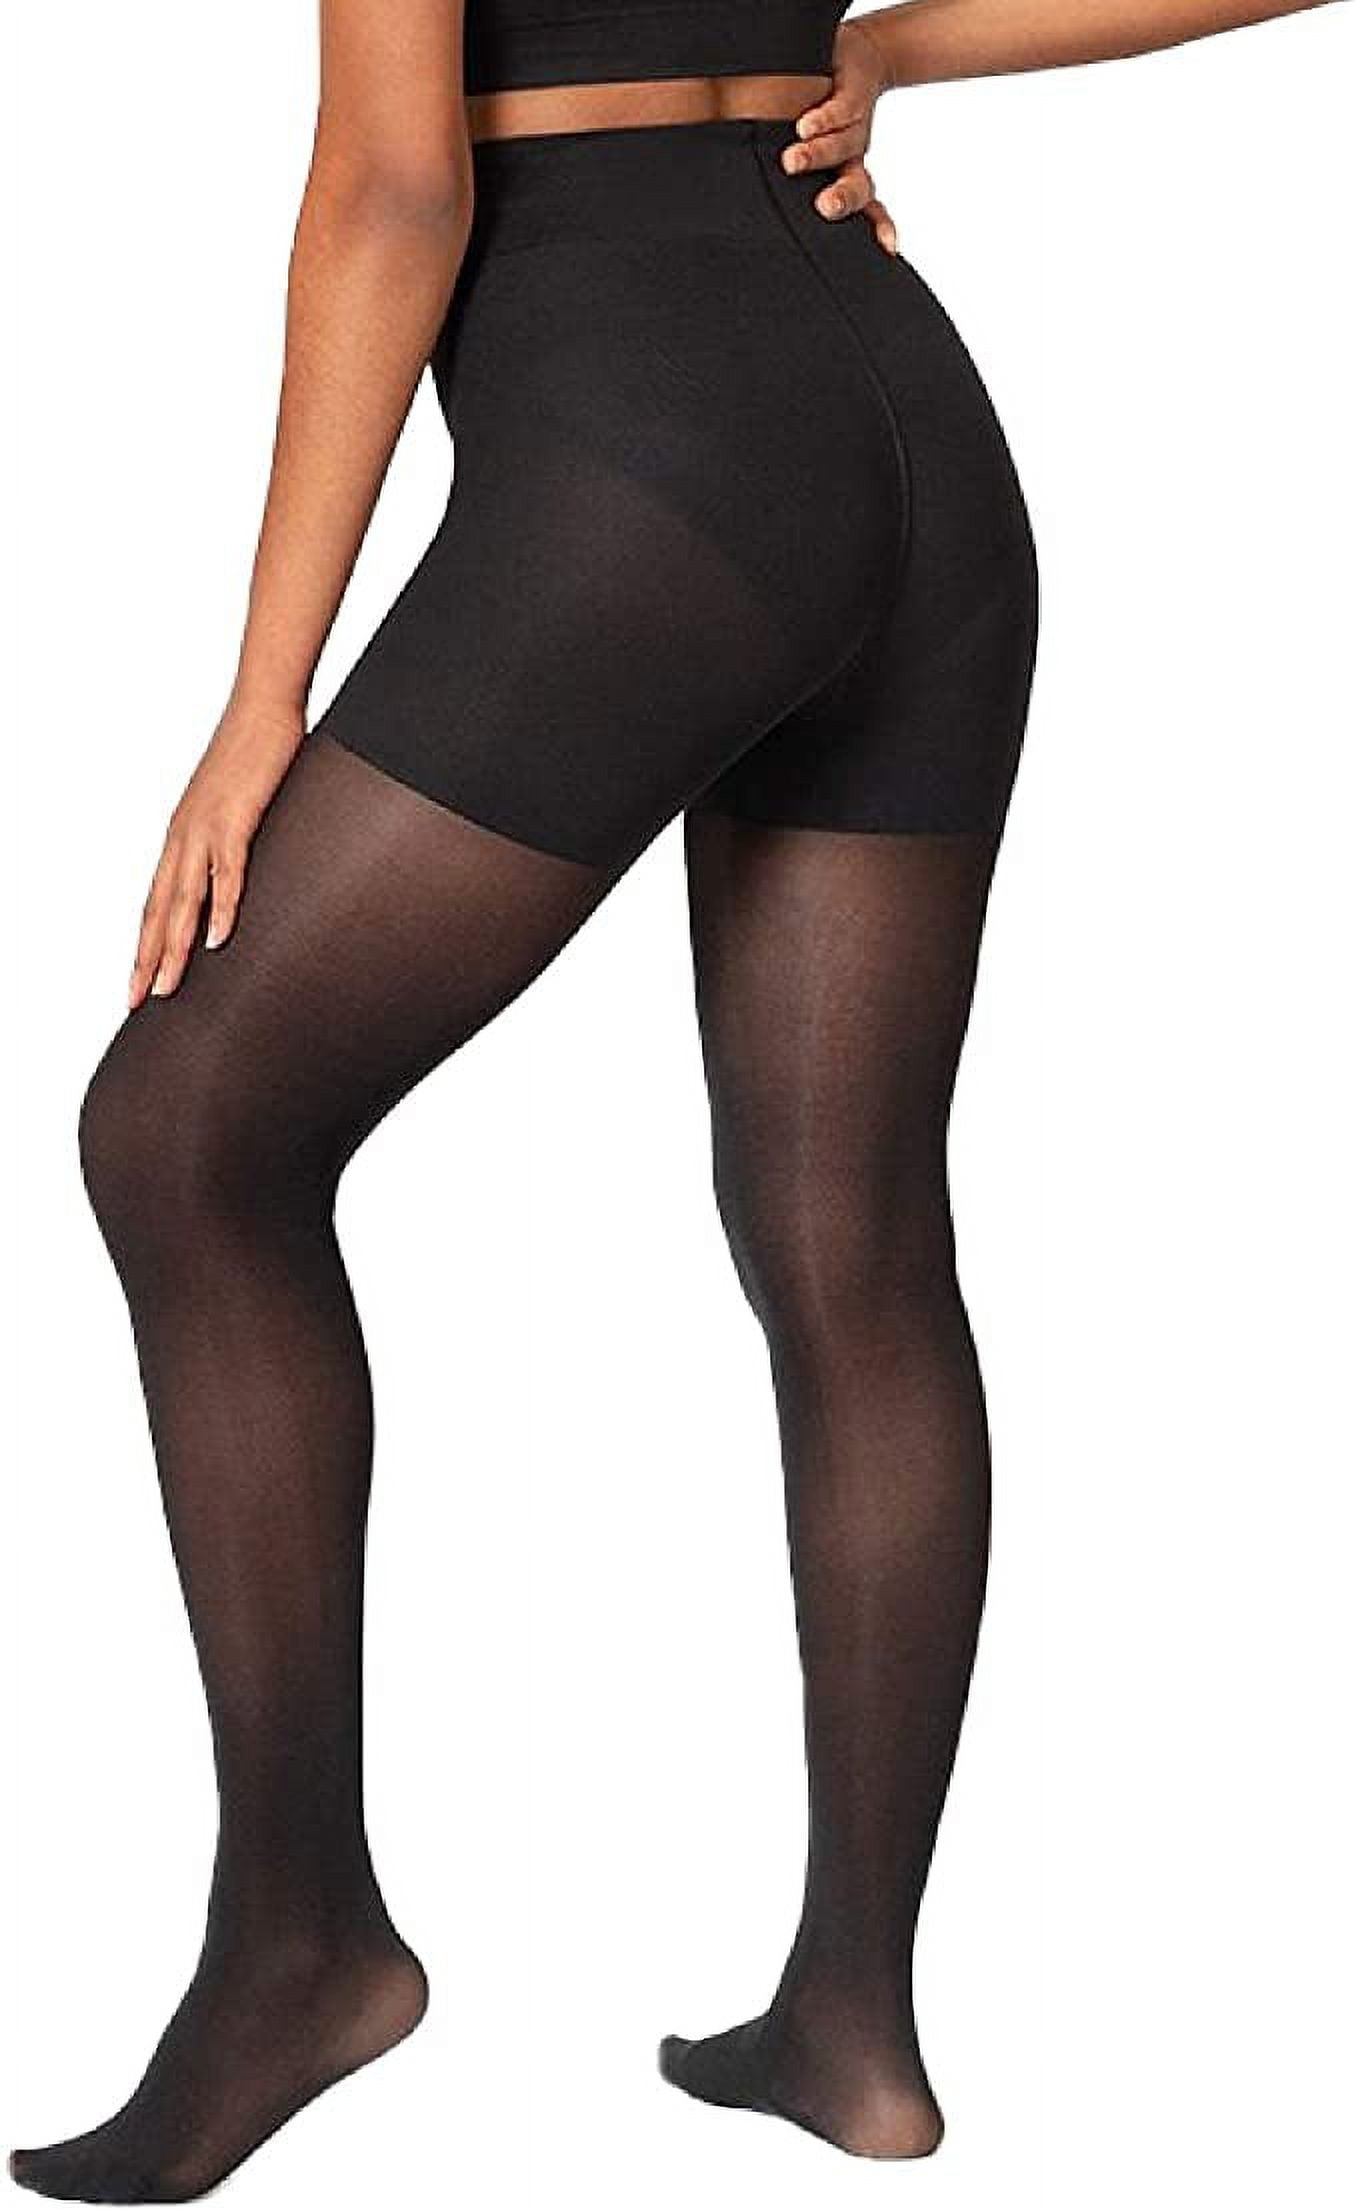 Shapermint Solid Black Opaque Tights with Nylon Control Top Hosiery  Pantyhose (Medium) 